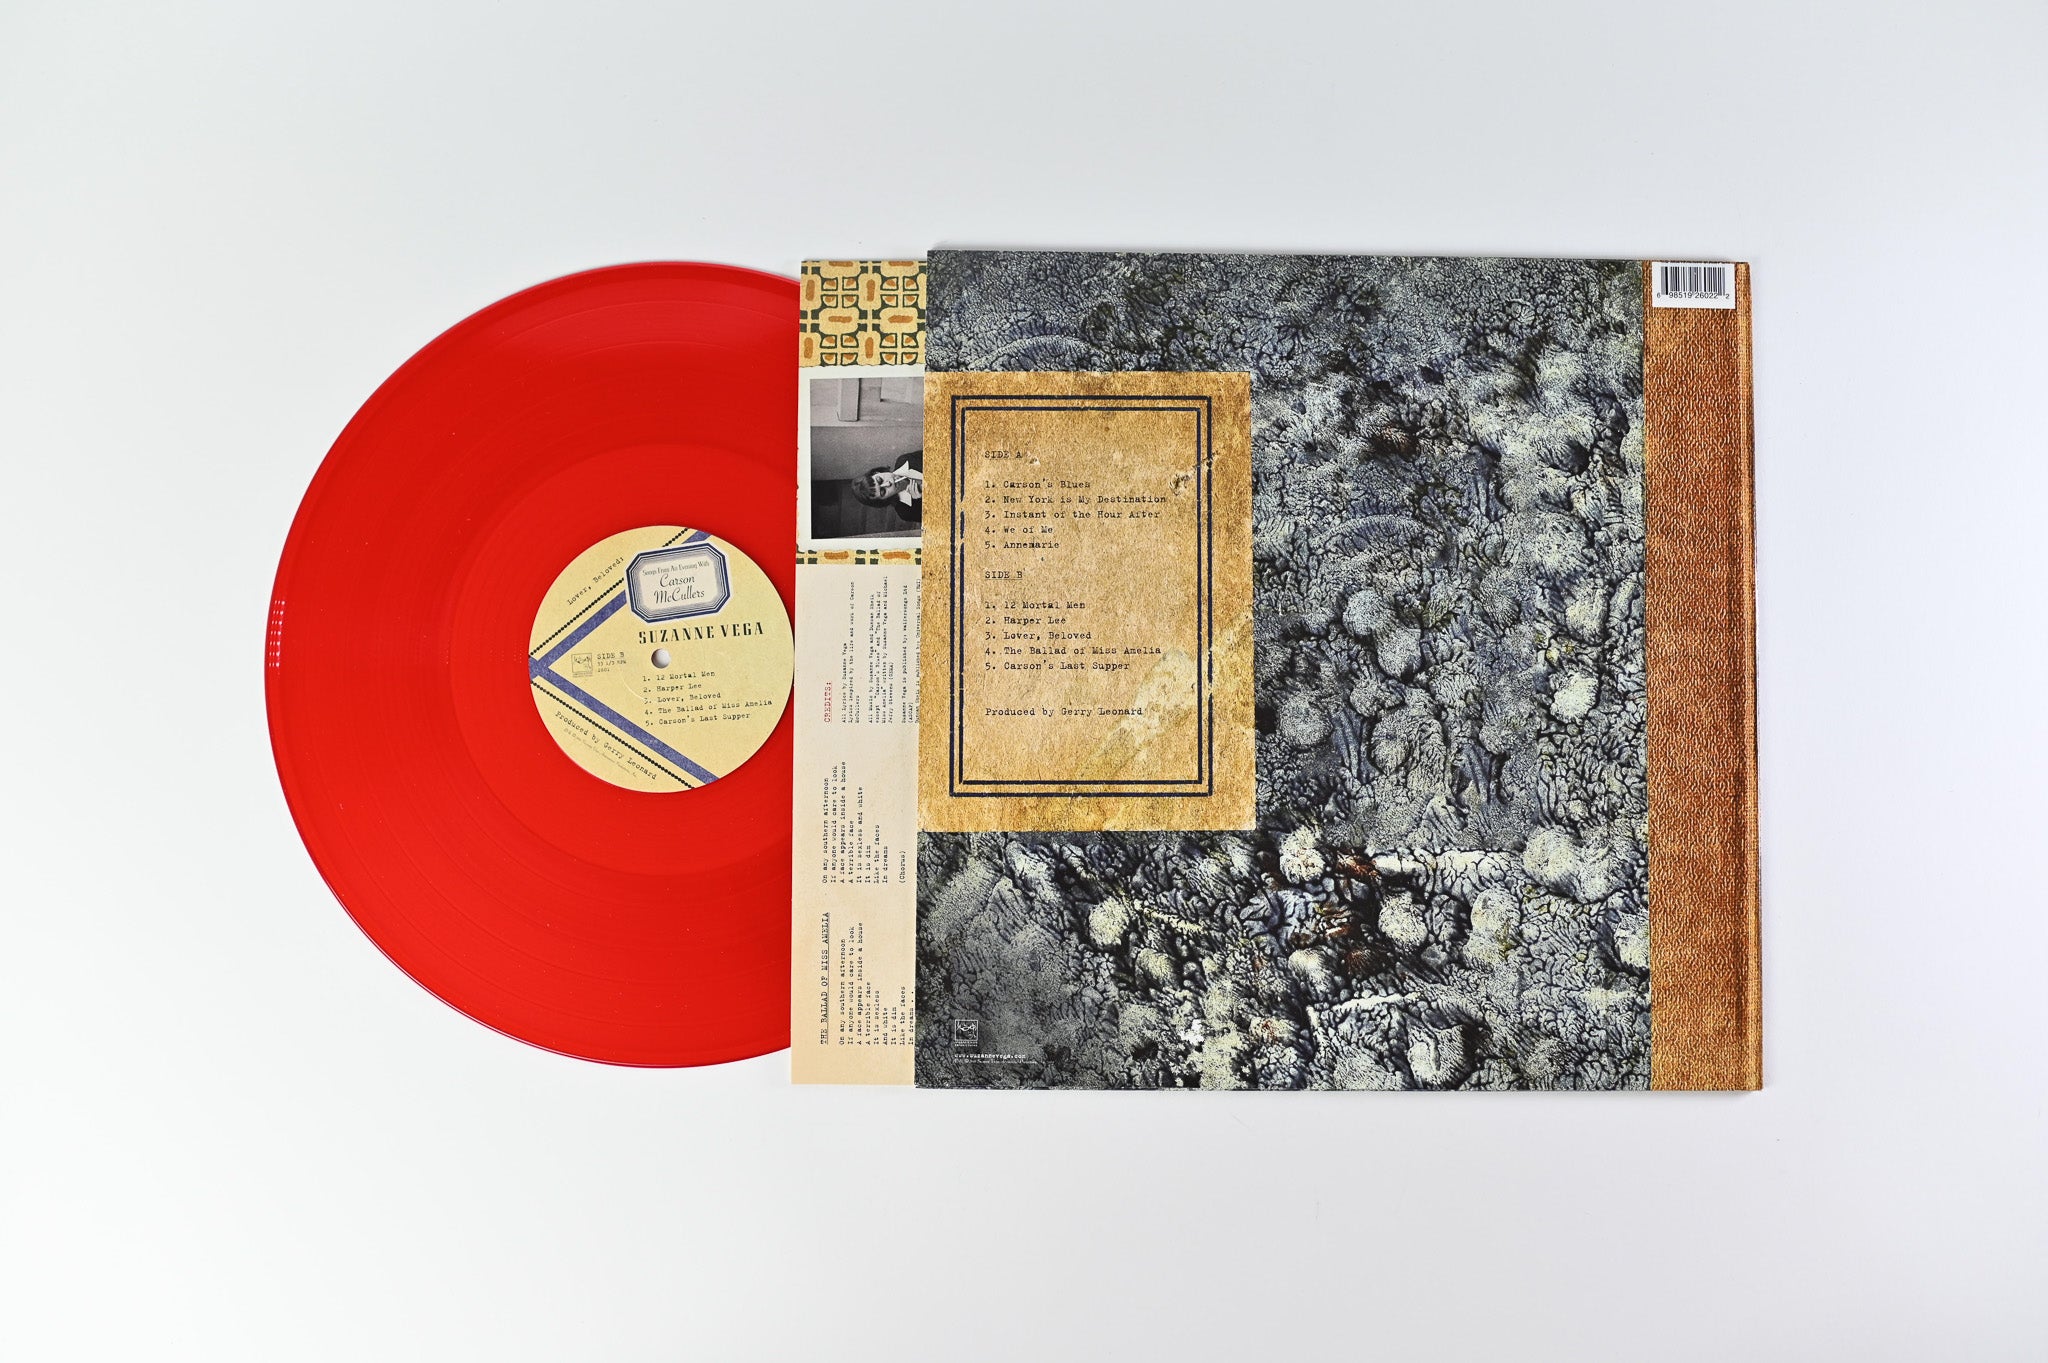 Suzanne Vega - Lover, Beloved: Songs From An Evening With Carson McCullers on Amanuensis Productions - Red Vinyl